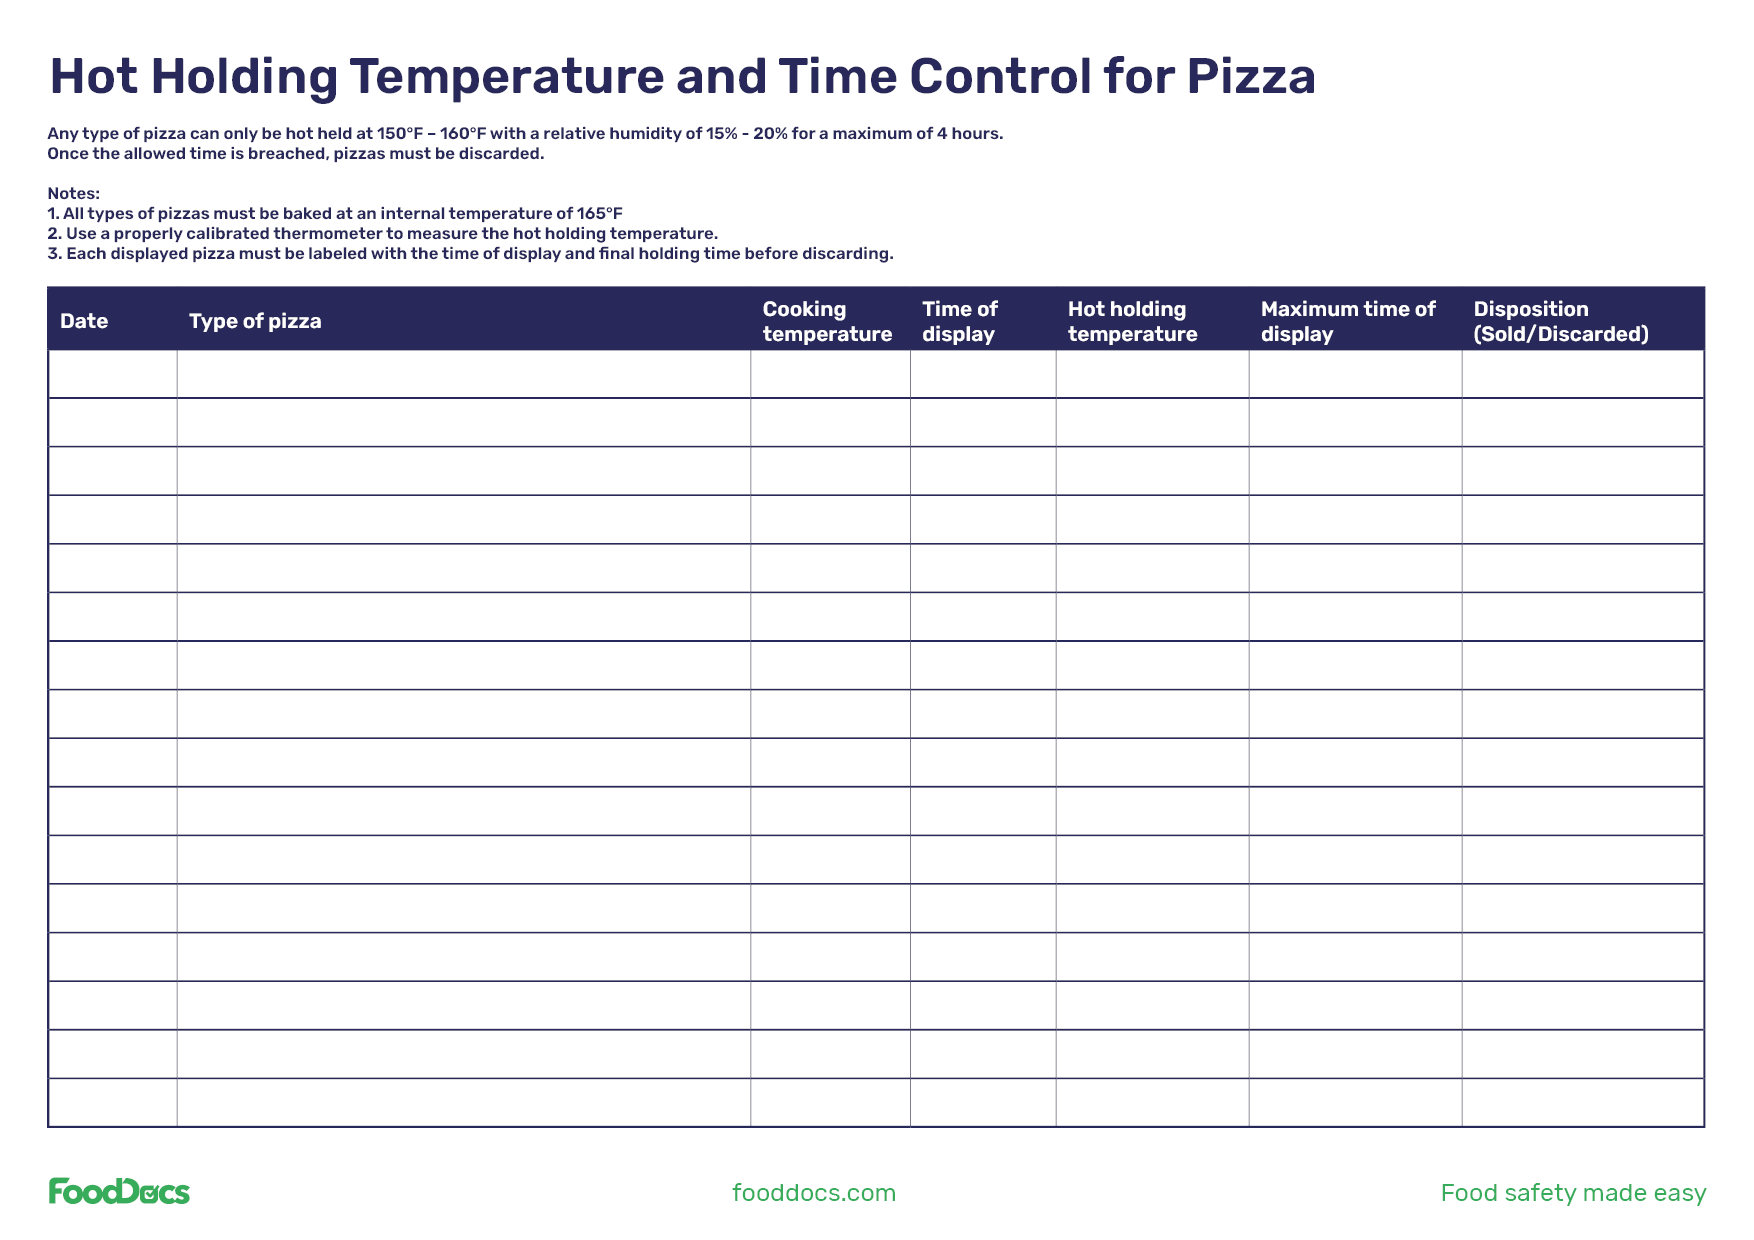 what is the minimum hot holding temperature requirement for pizza | Download Free Template